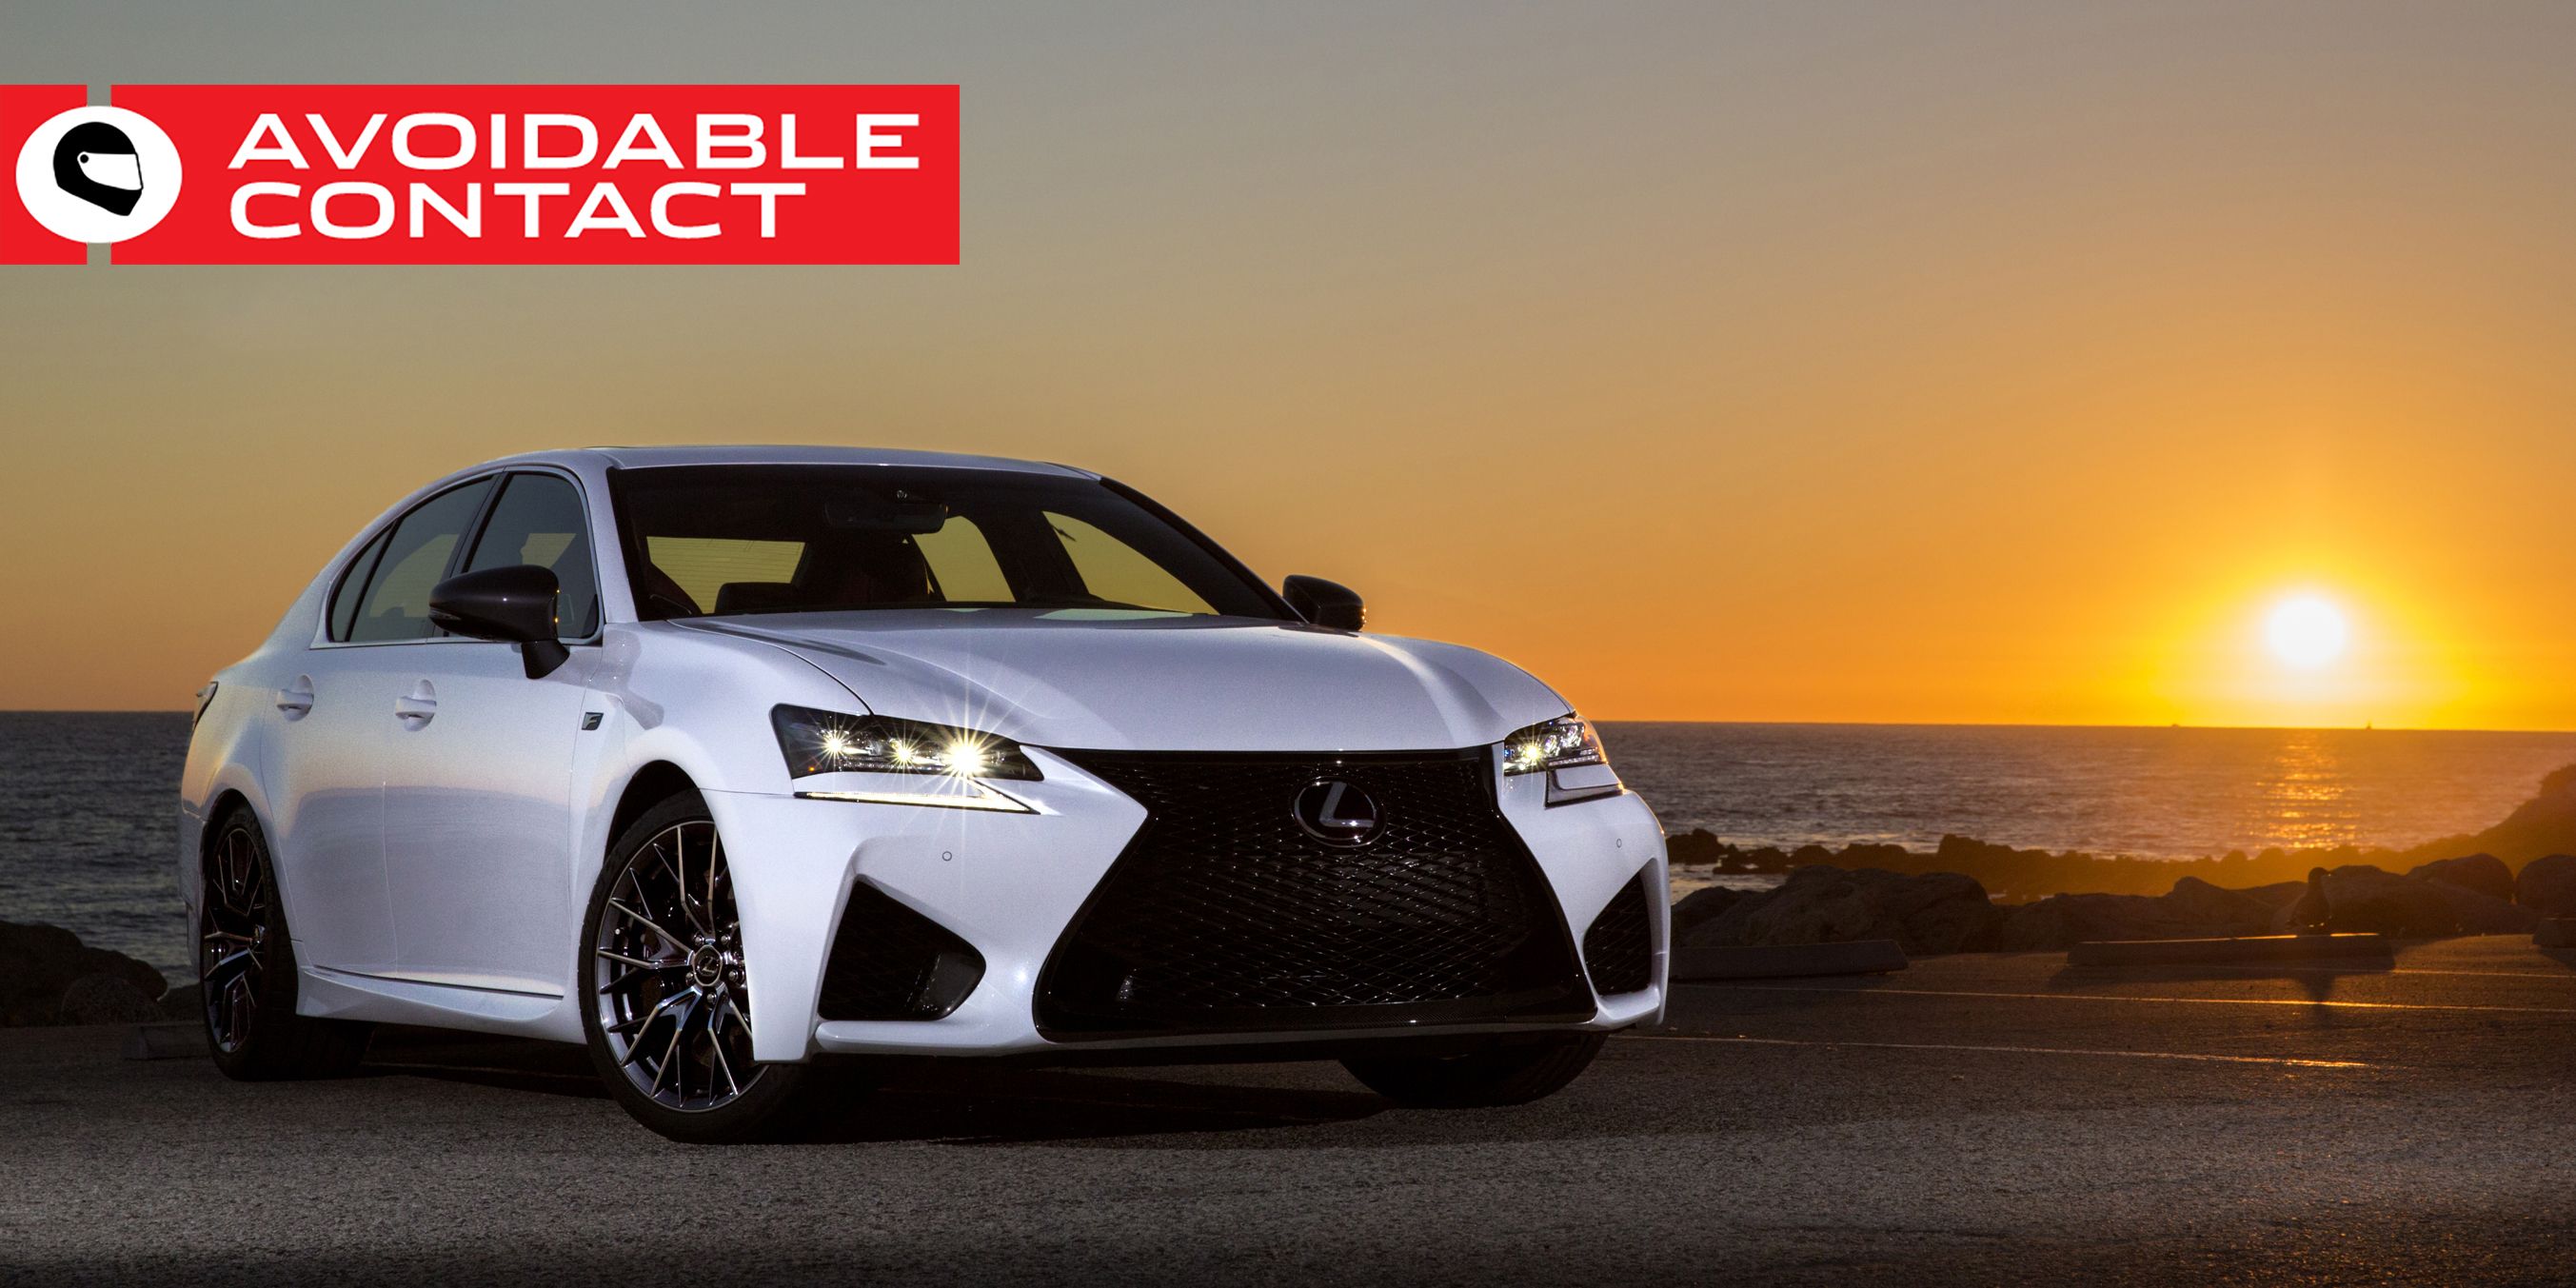 The Lexus Gs F Is The Future Classic Nobody Is Talking About